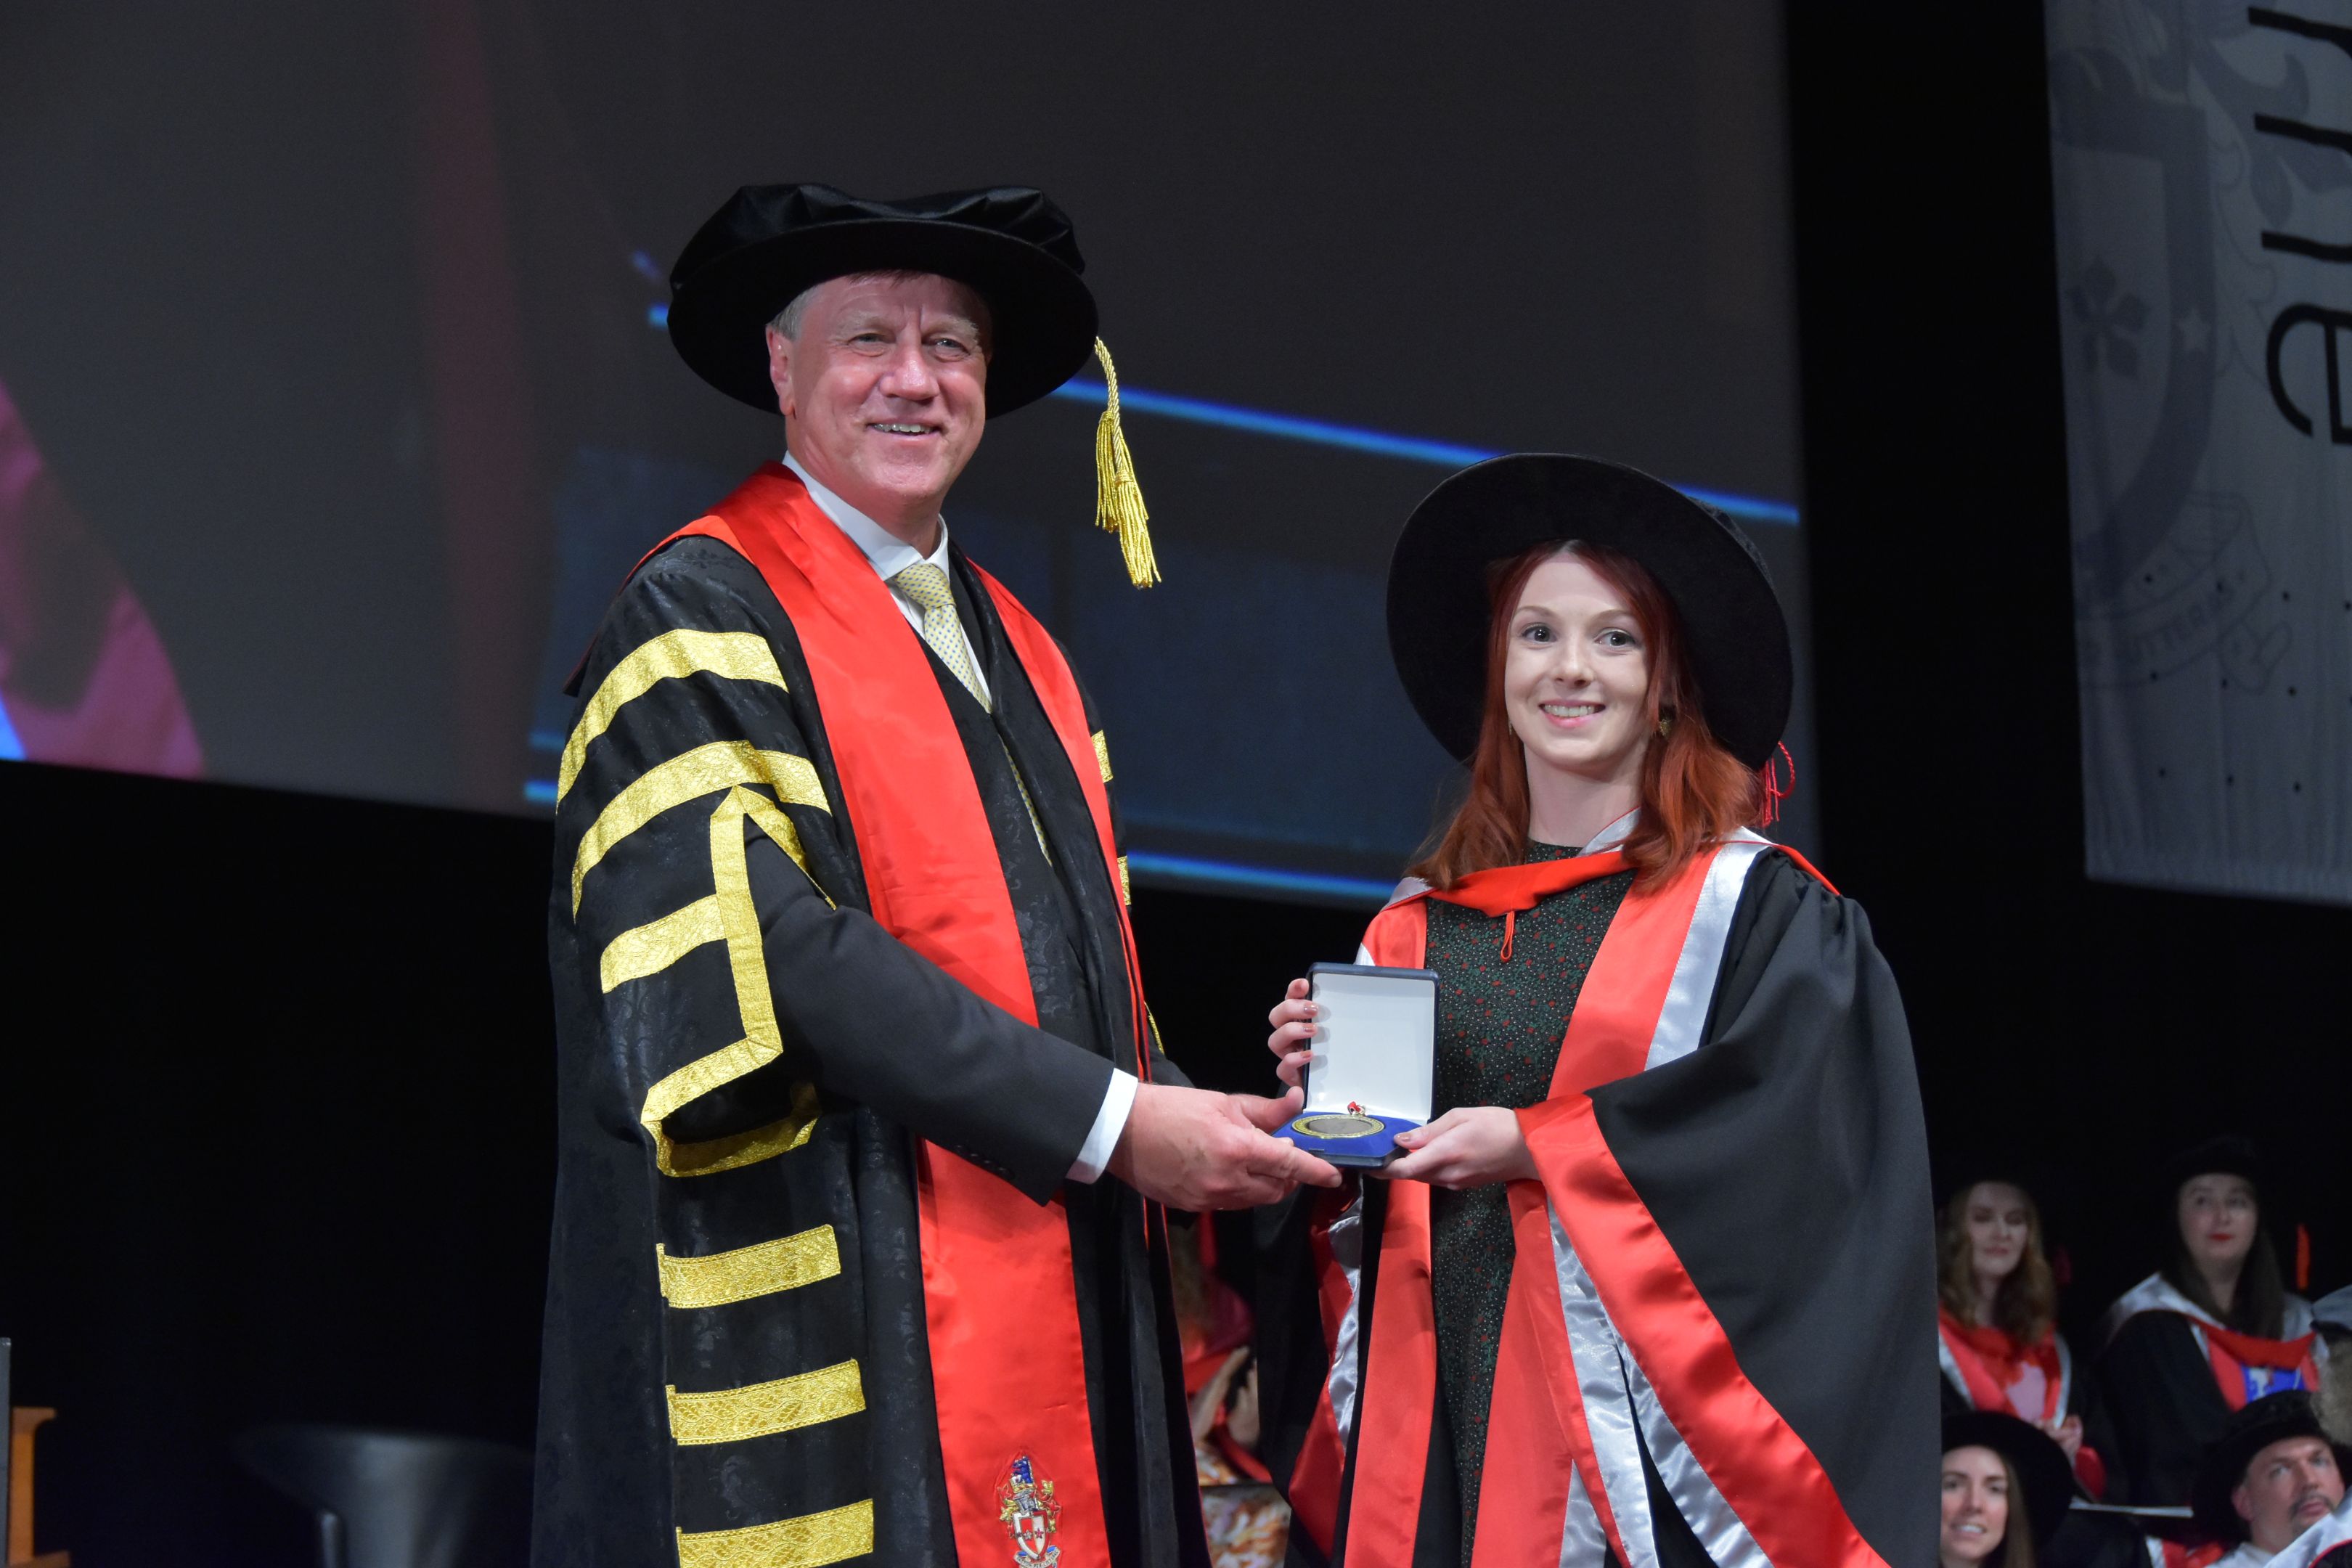 Recipient of the 2022 University Medal Dr Stephanie Harkin shaking hands with Swinburne Chancellor John Pollaers